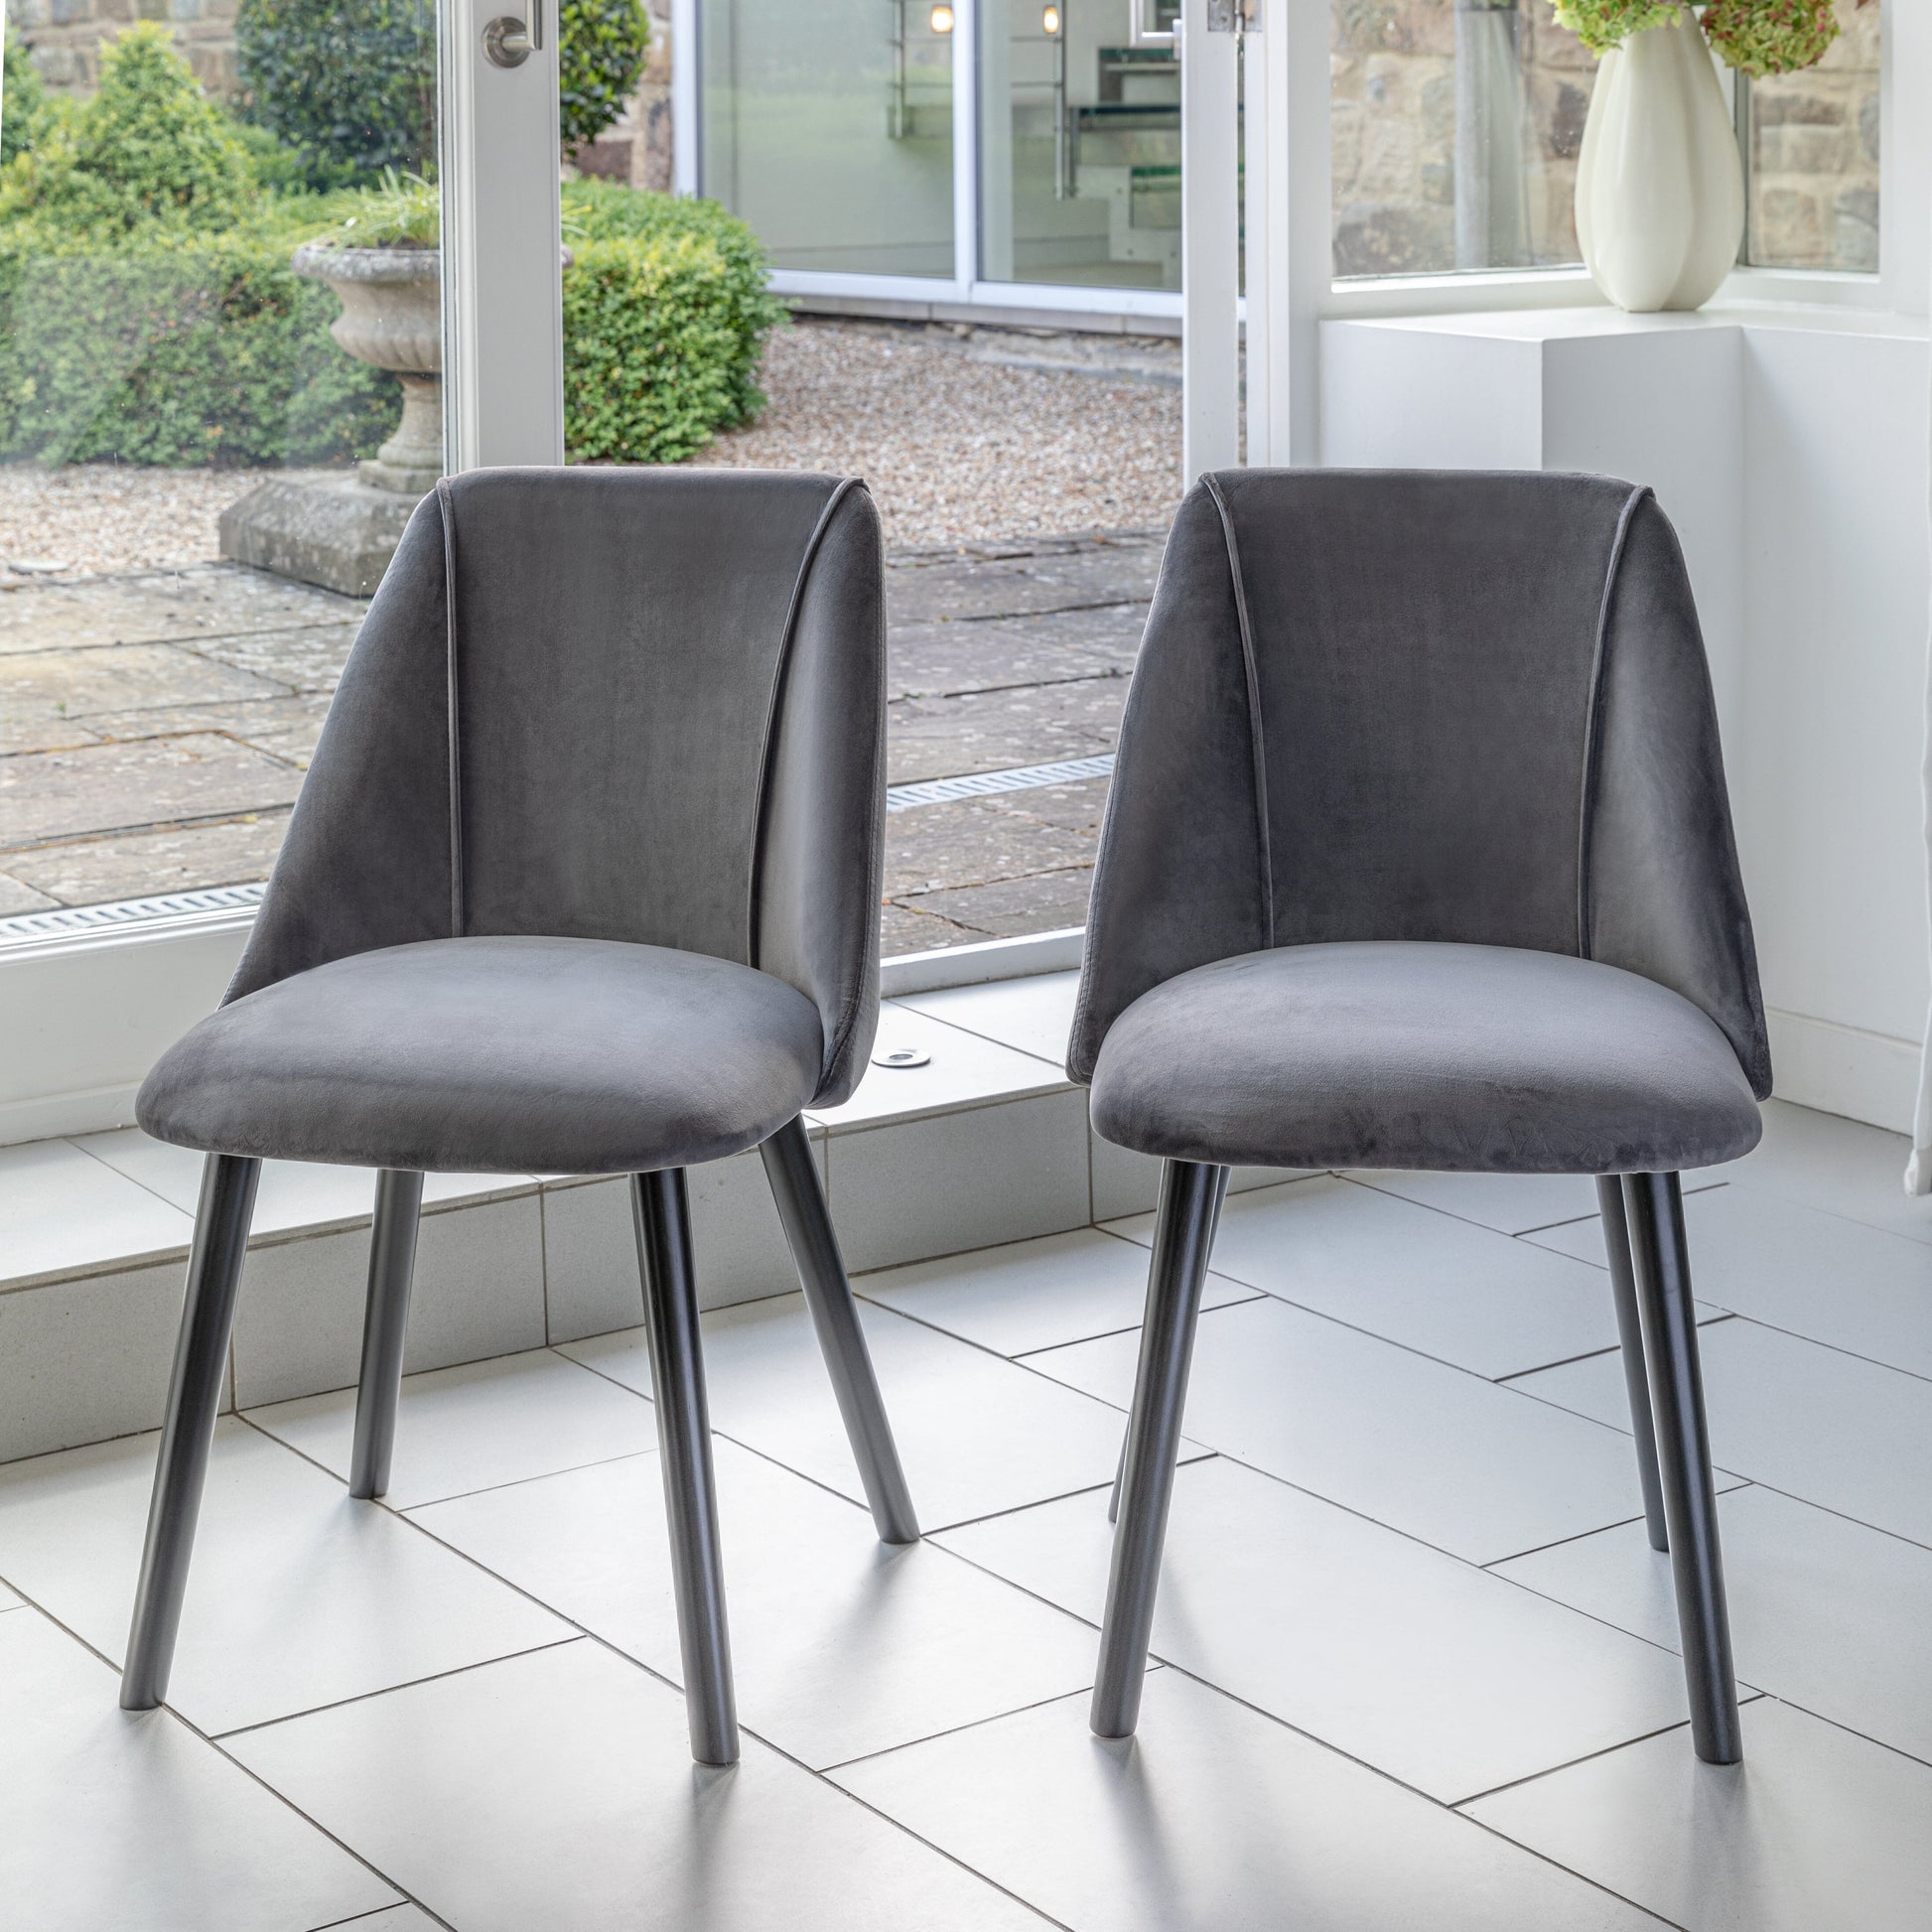 Amelia Extendable Black Dining Table Set - 6 Seater - Freya Grey Dining Chairs With Black Legs